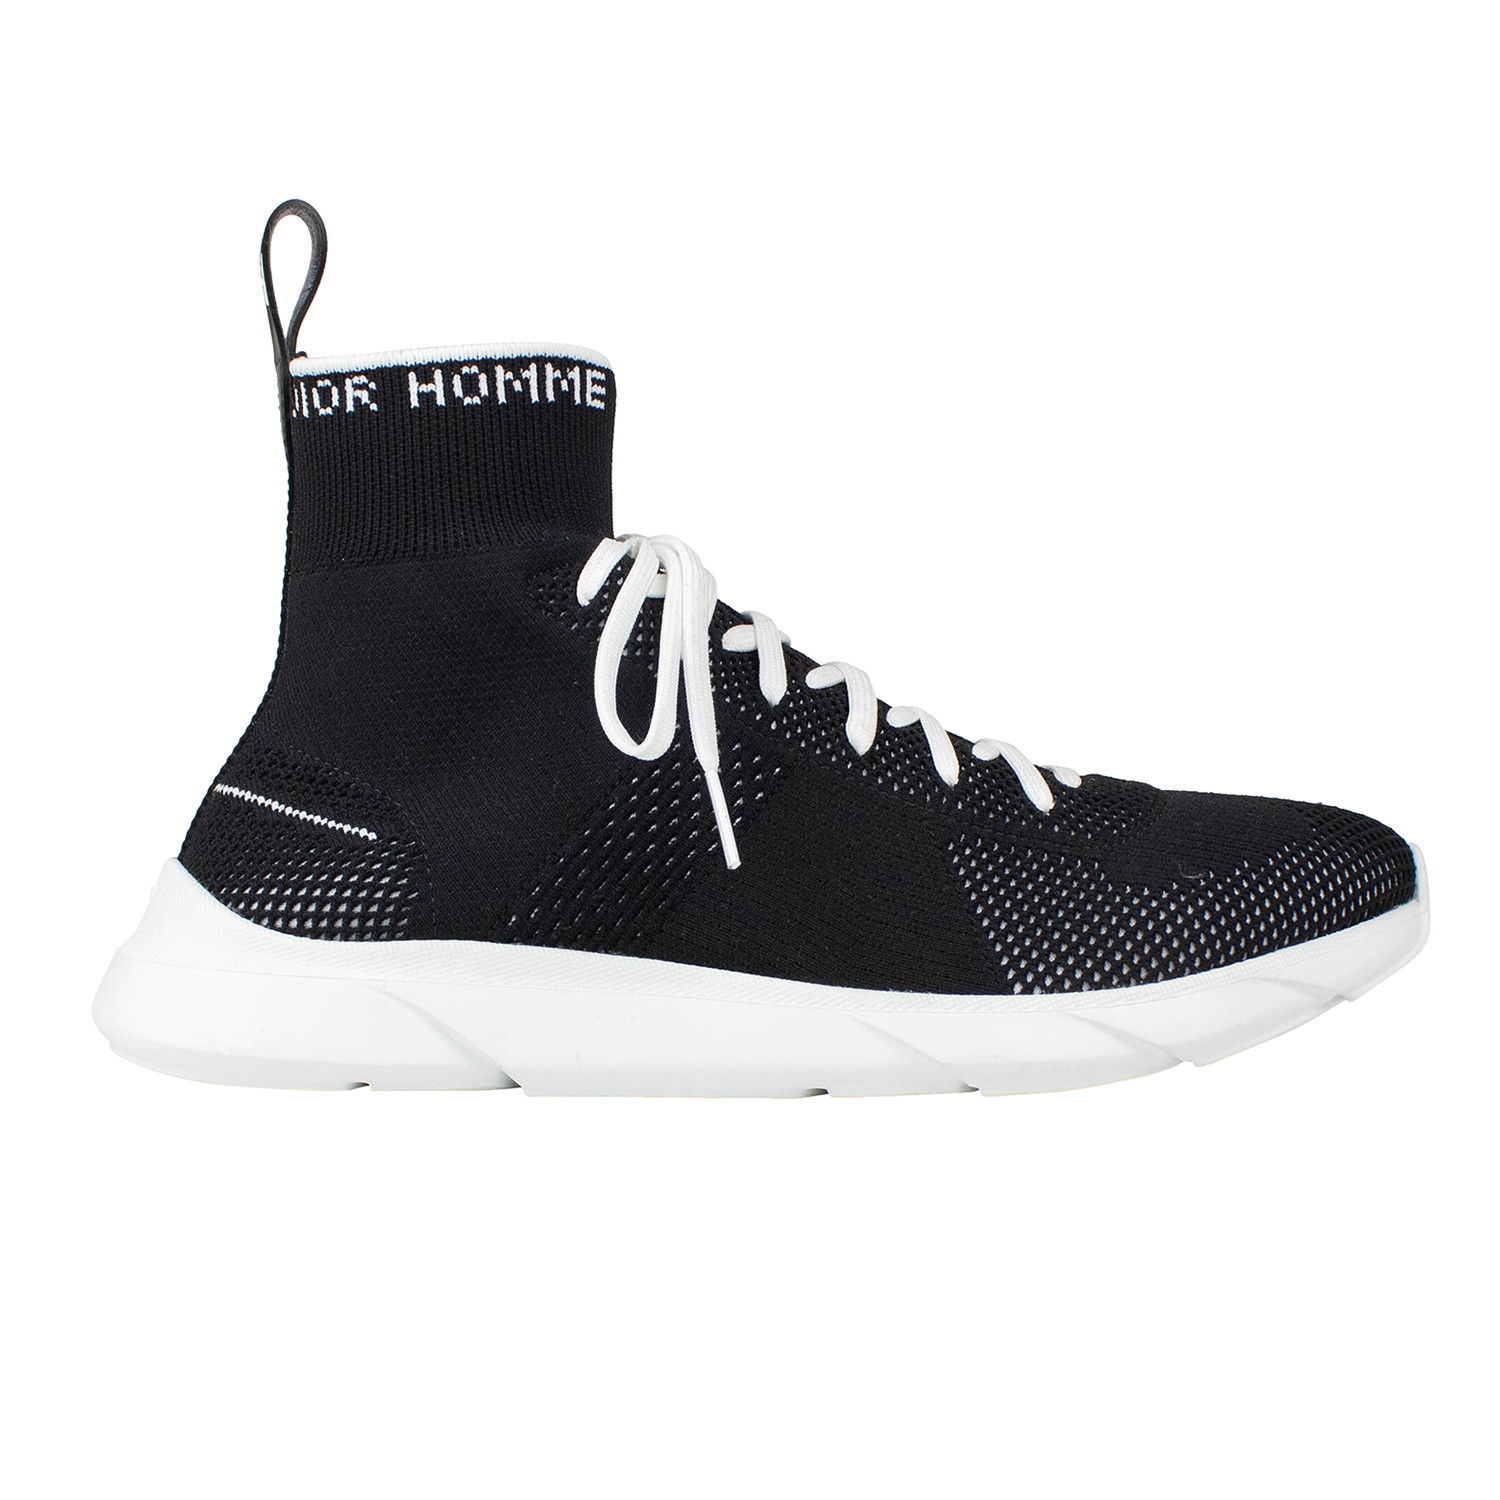 Dior Homme // Knit Lace Up B21 Sock Sneakers // Black (US: 10) - Luxury ...